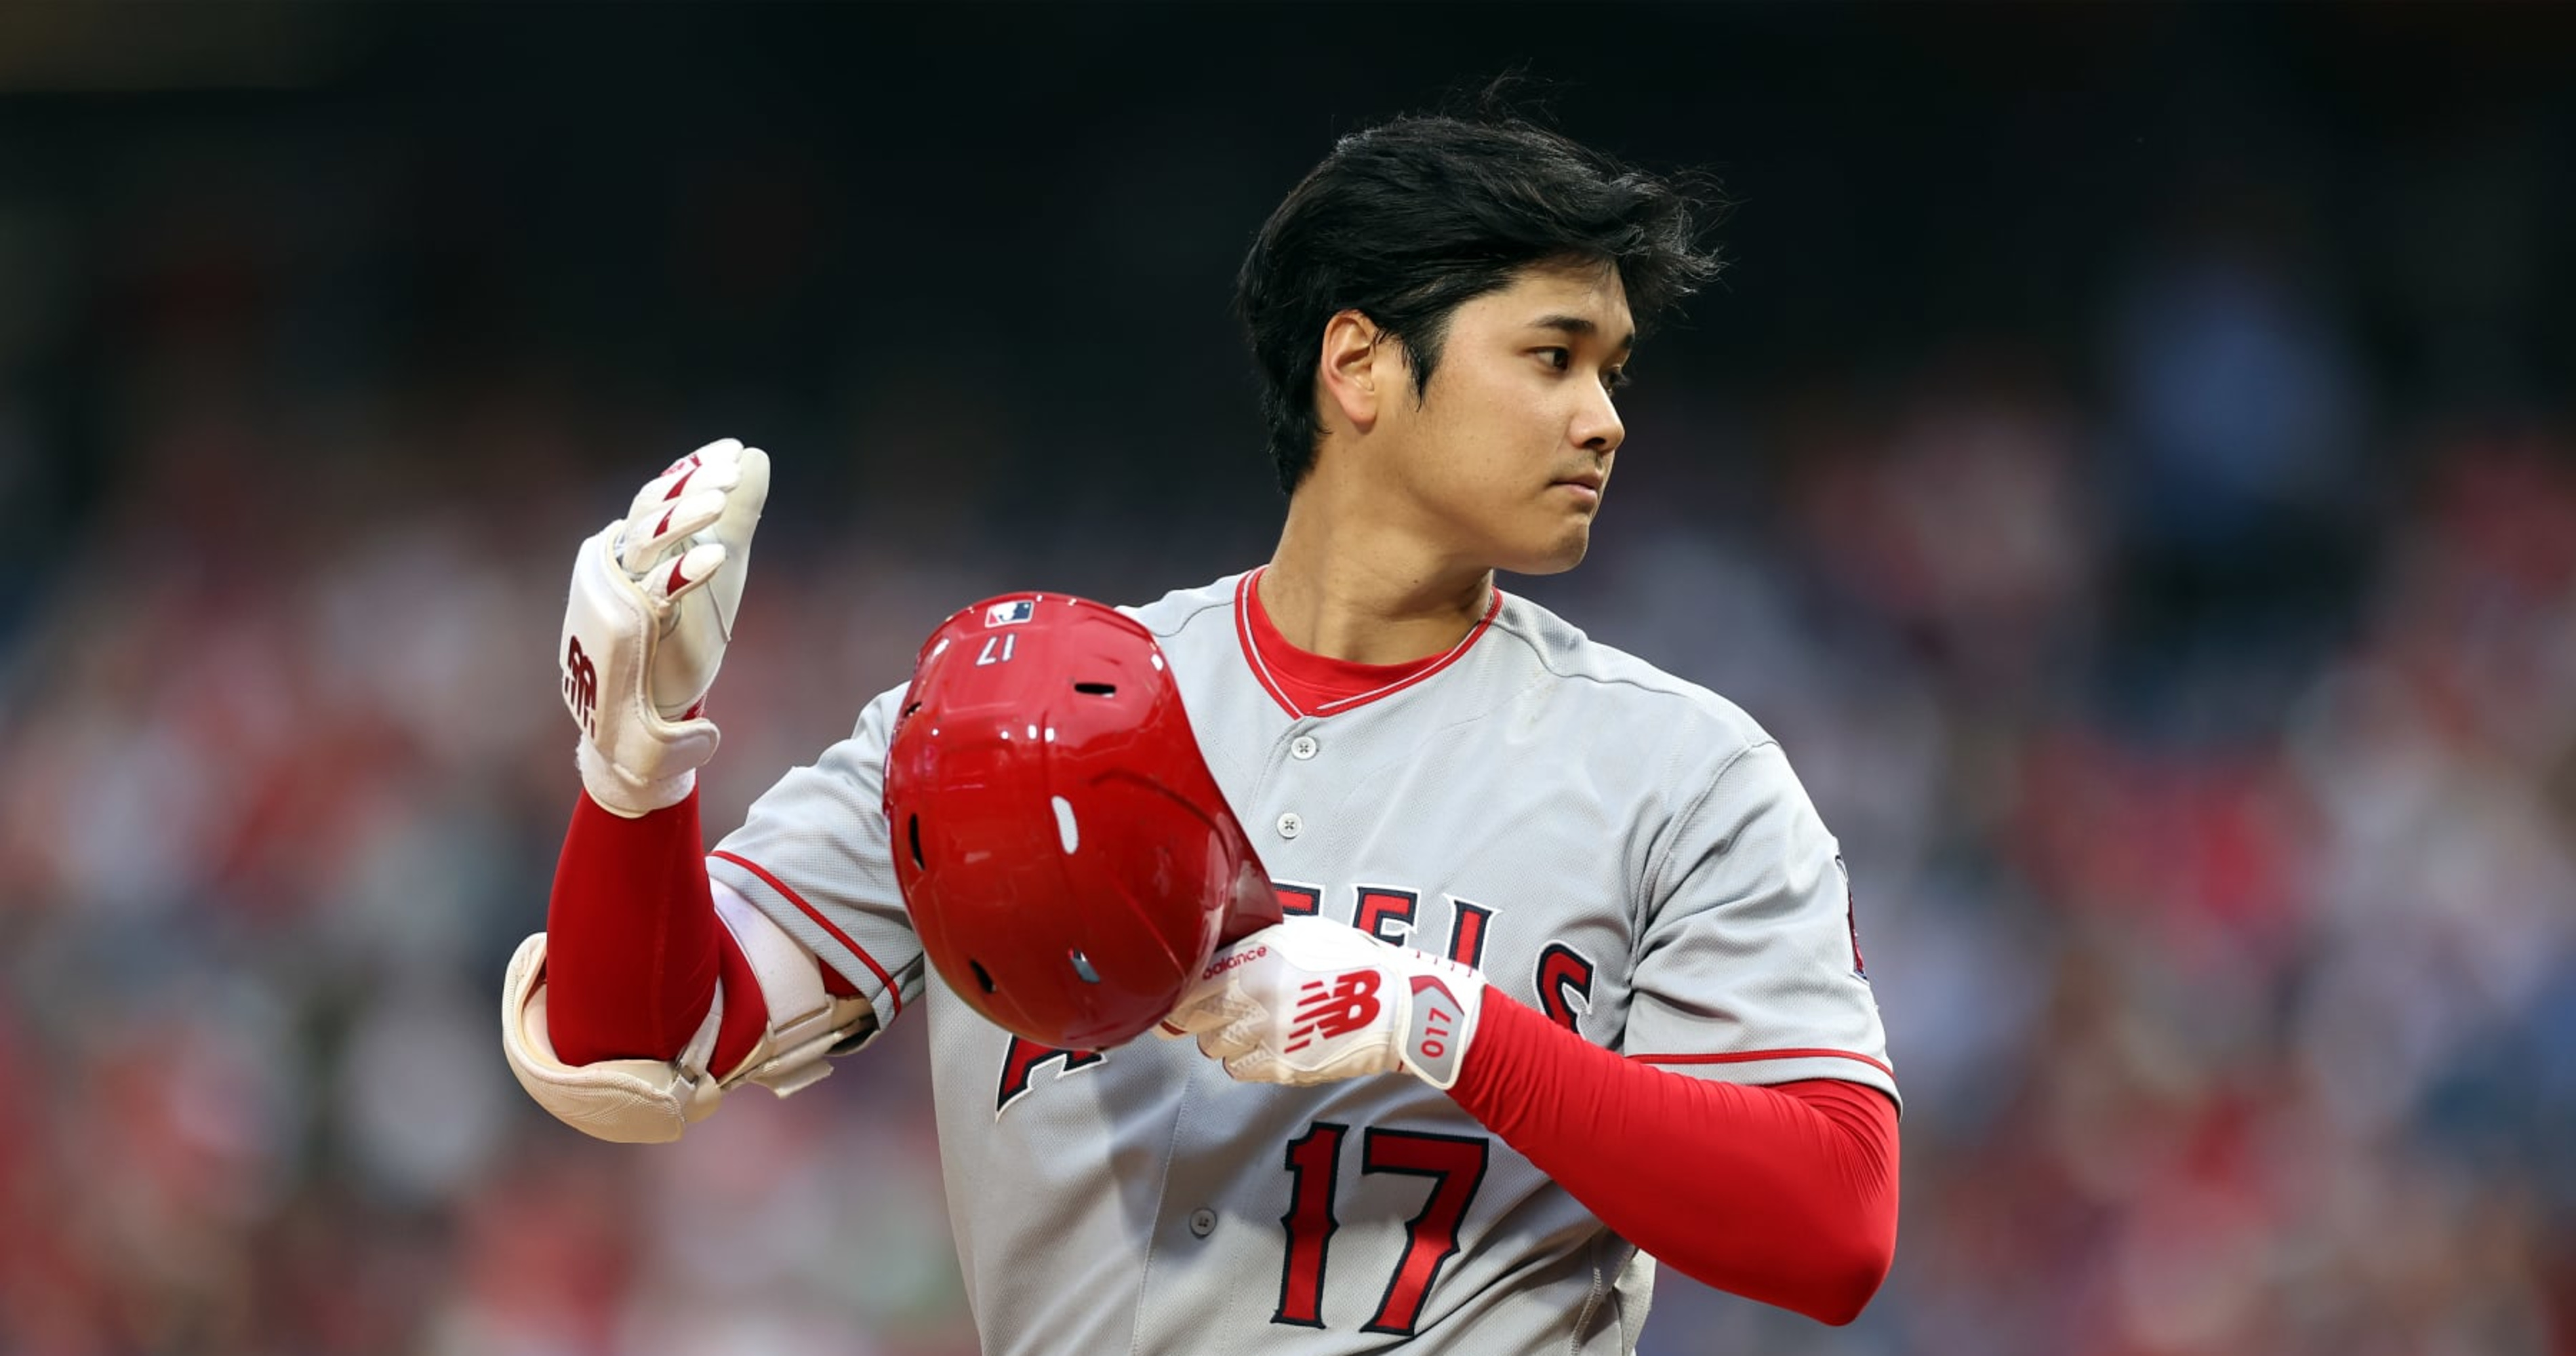 Angels' Shohei Ohtani Limps Off With Apparent Leg Injury vs